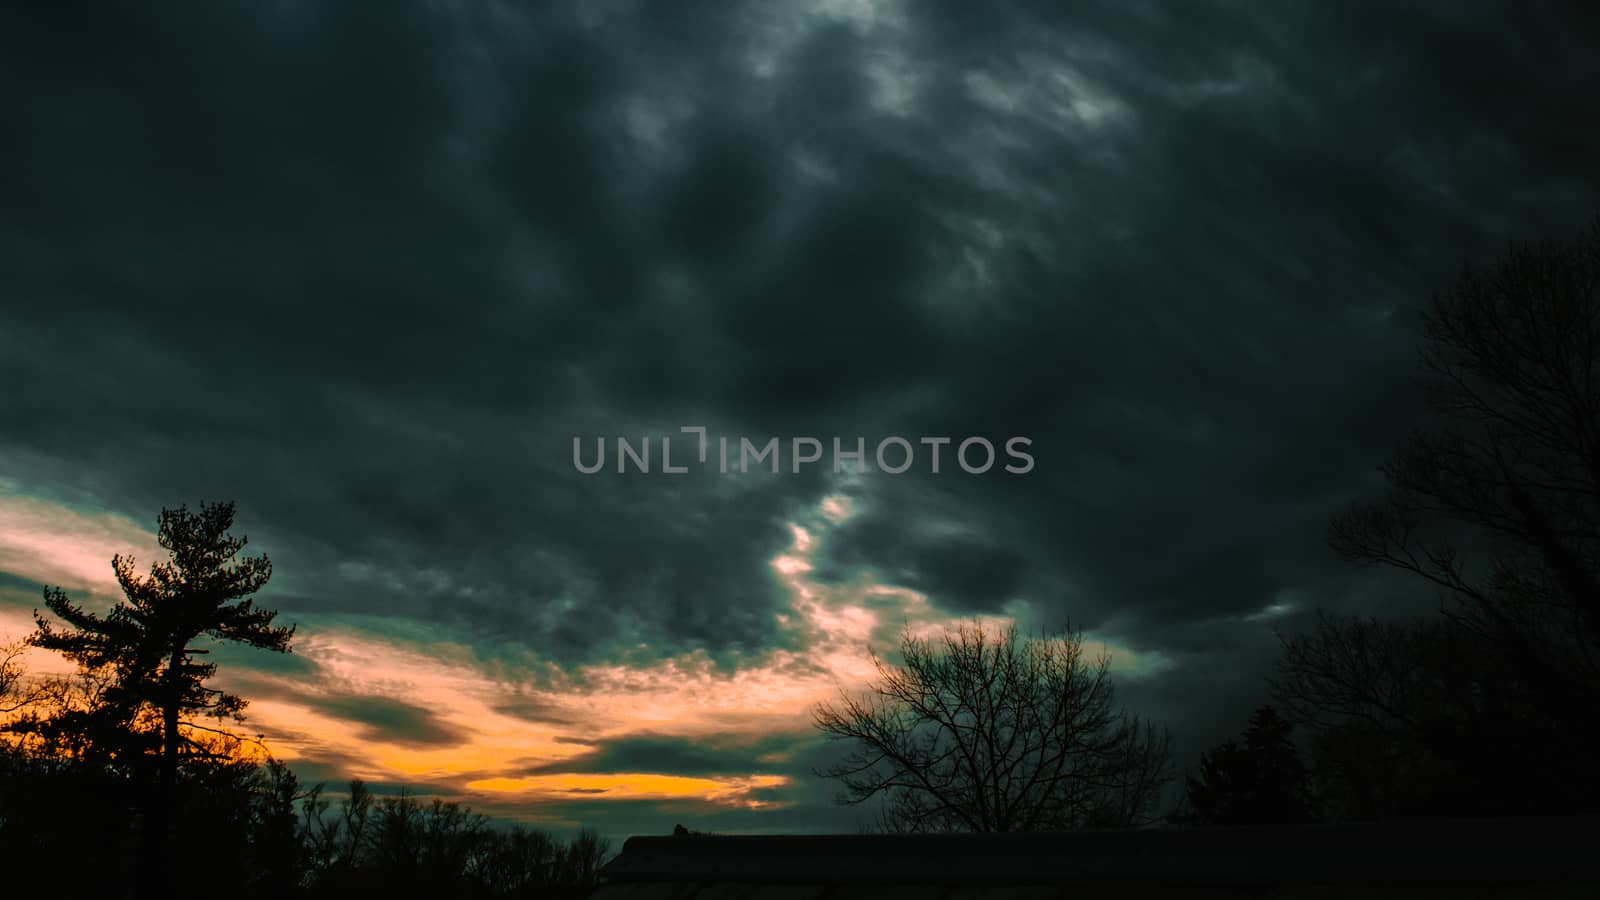 A Stormy Sunset With Silhouette Trees in the bottom of the frame by bju12290